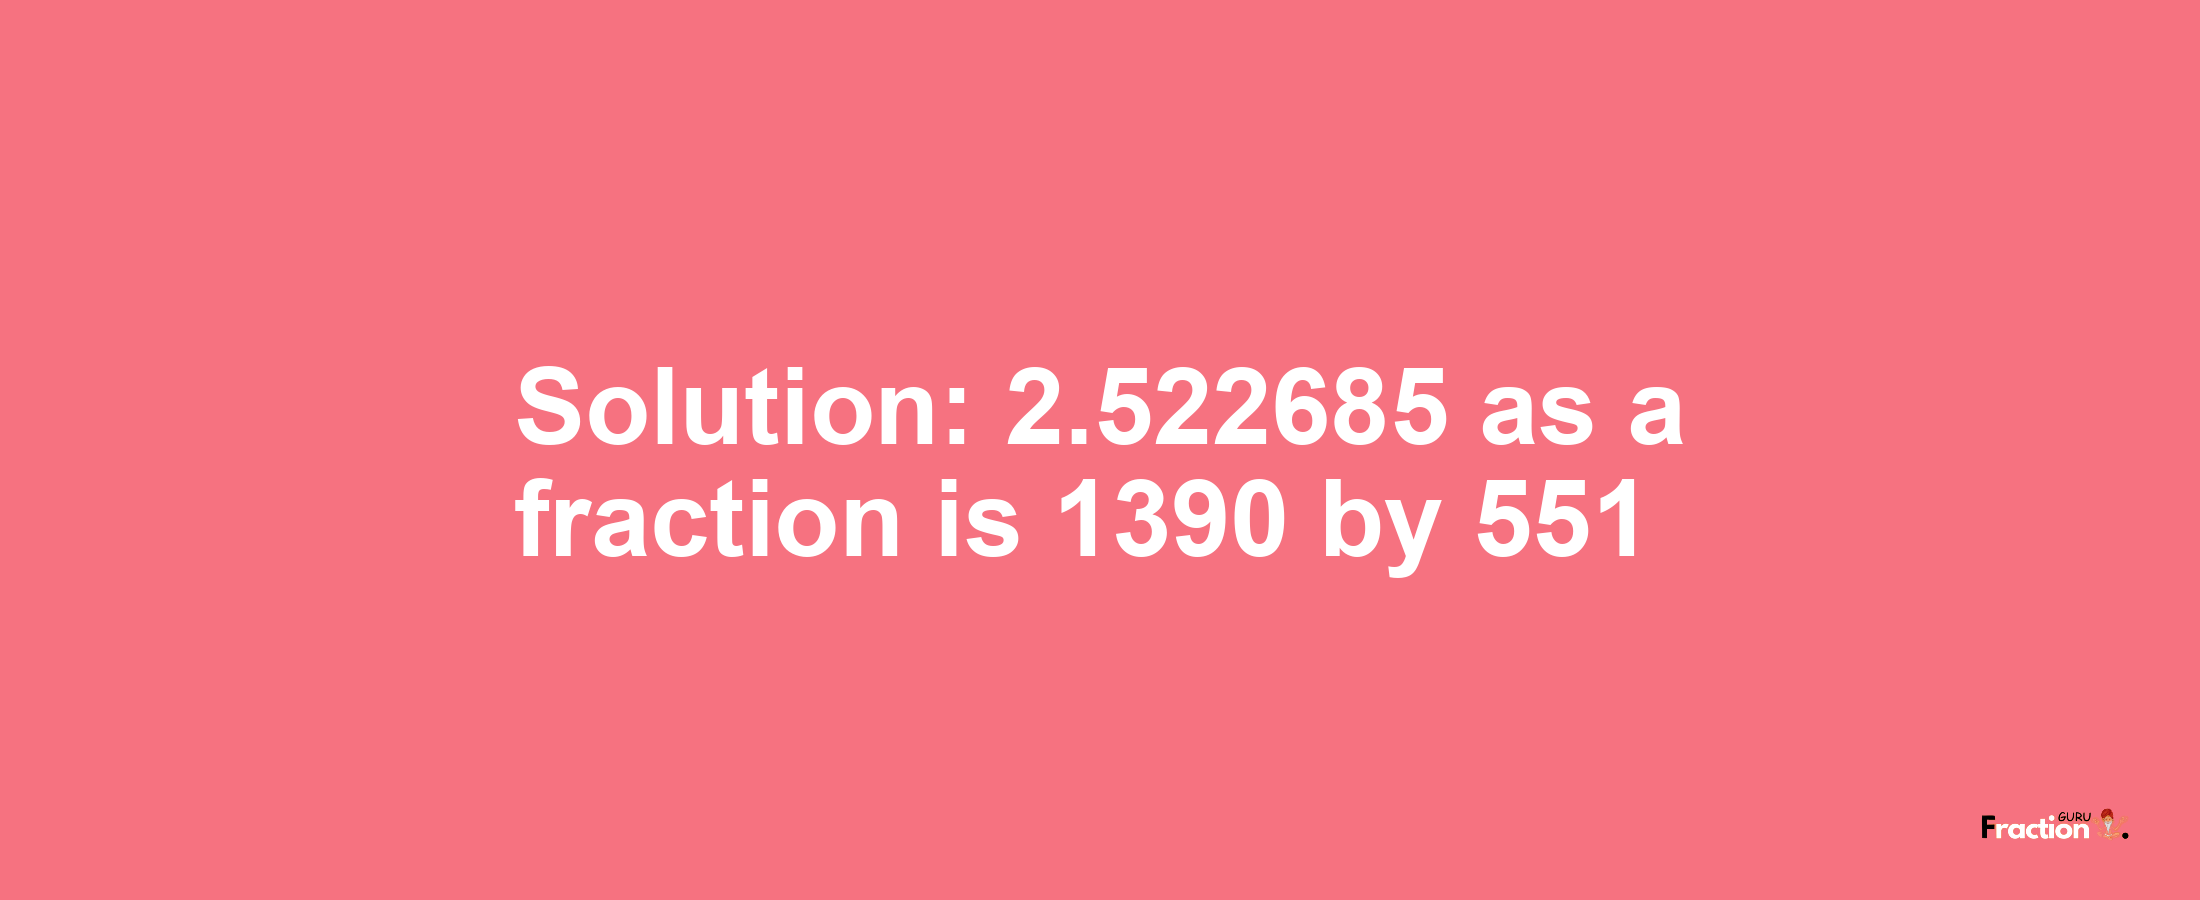 Solution:2.522685 as a fraction is 1390/551